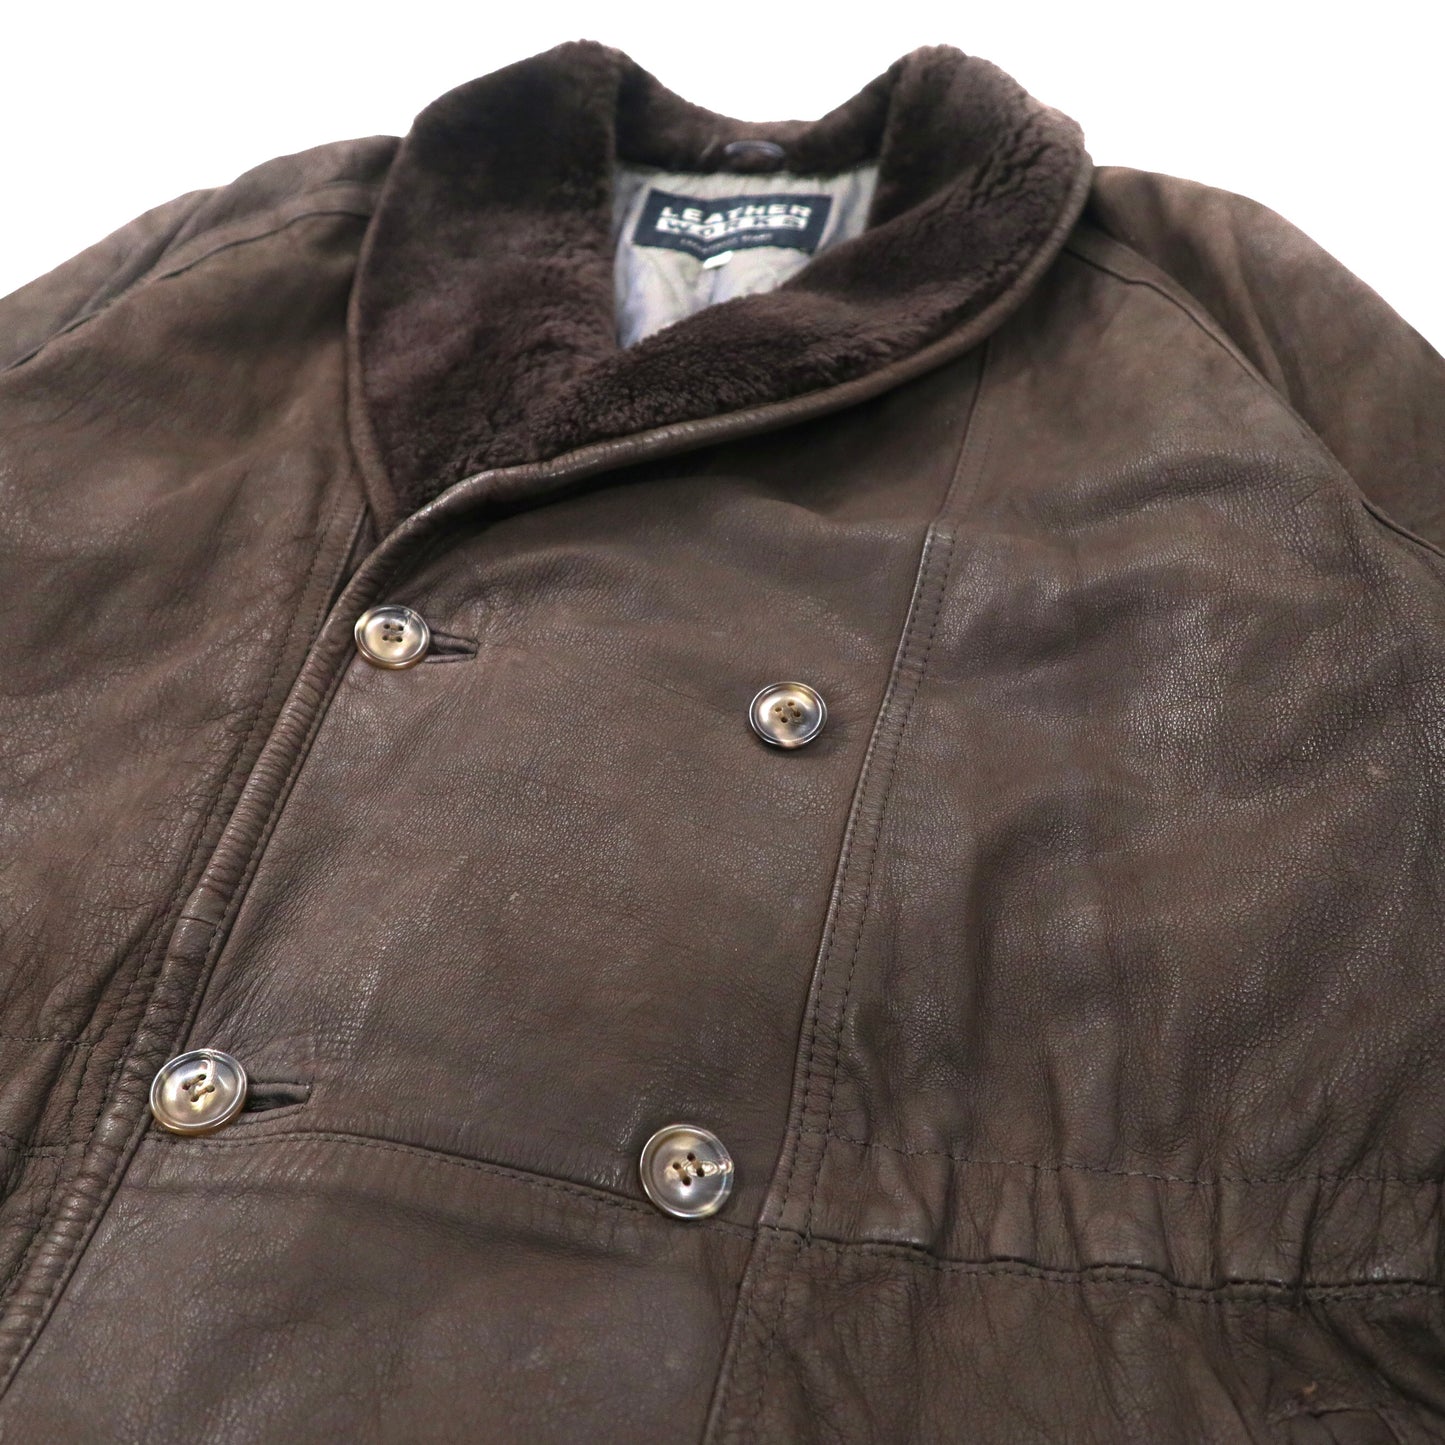 LEATHER WORKS EXCLUSIVELY BEAMS ショールカラームートンコート 38 ブラウン レザー 90年代